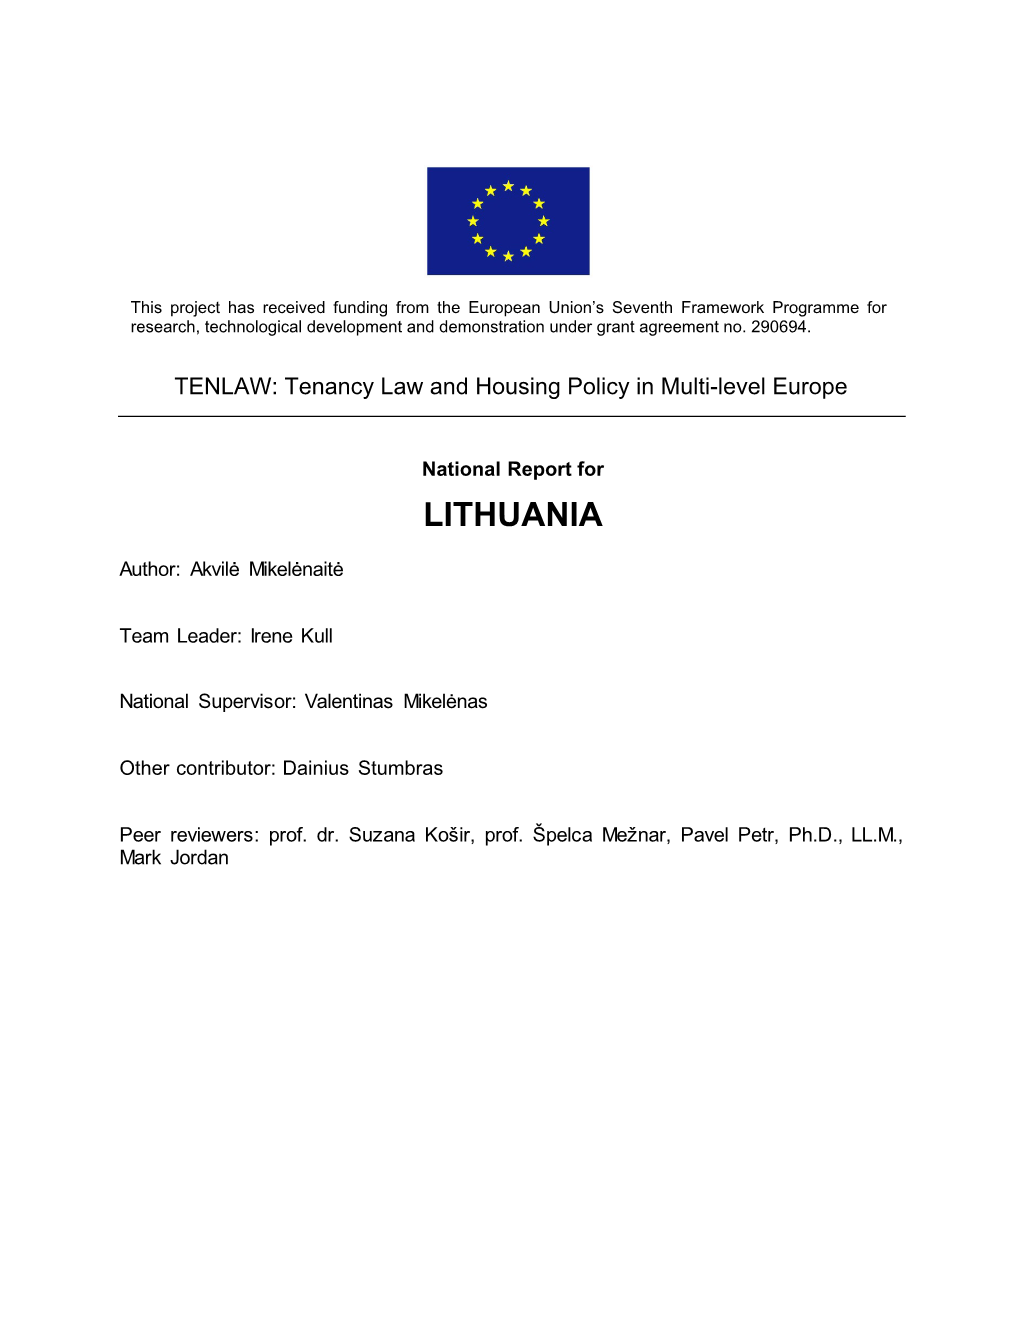 National Report for Lithuania Table of Contents